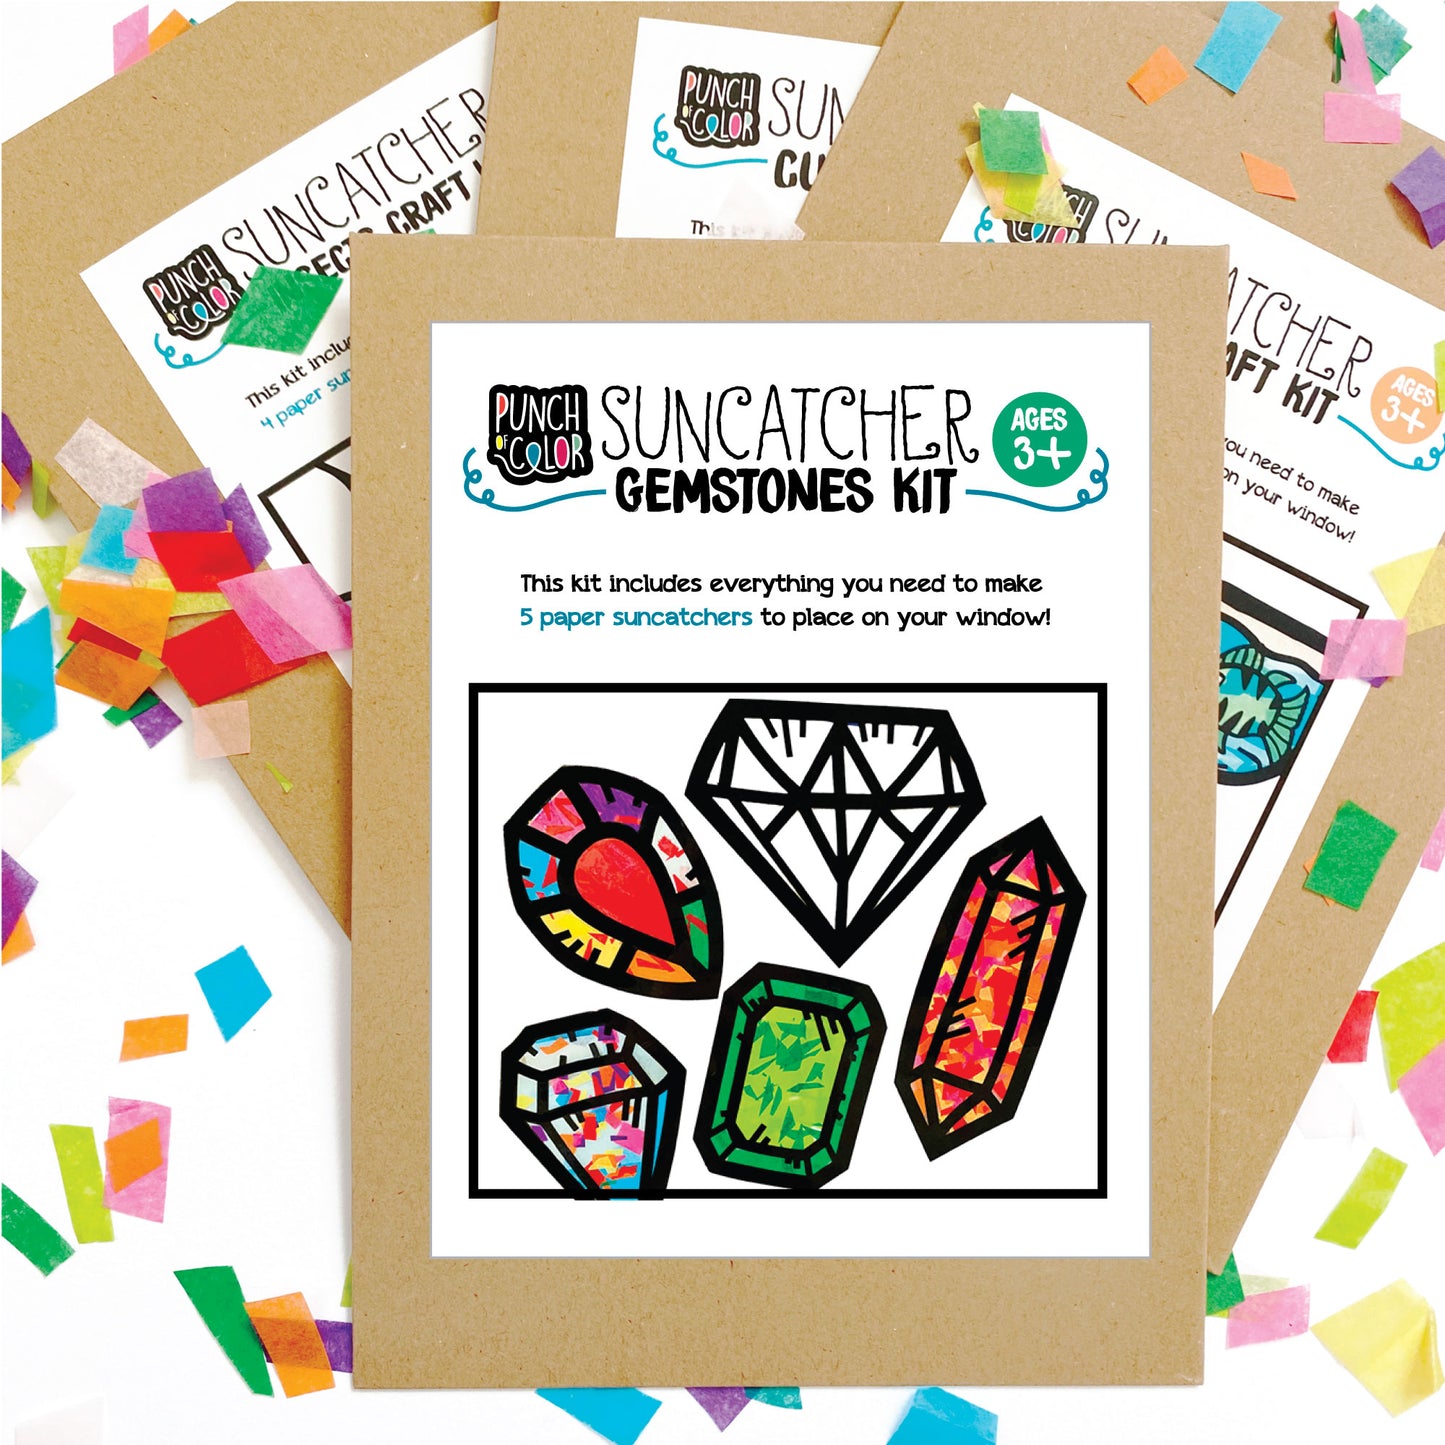 Gemstones suncatcher arts and crafts kit, a mess-free paper based activity for toddlers and kids.